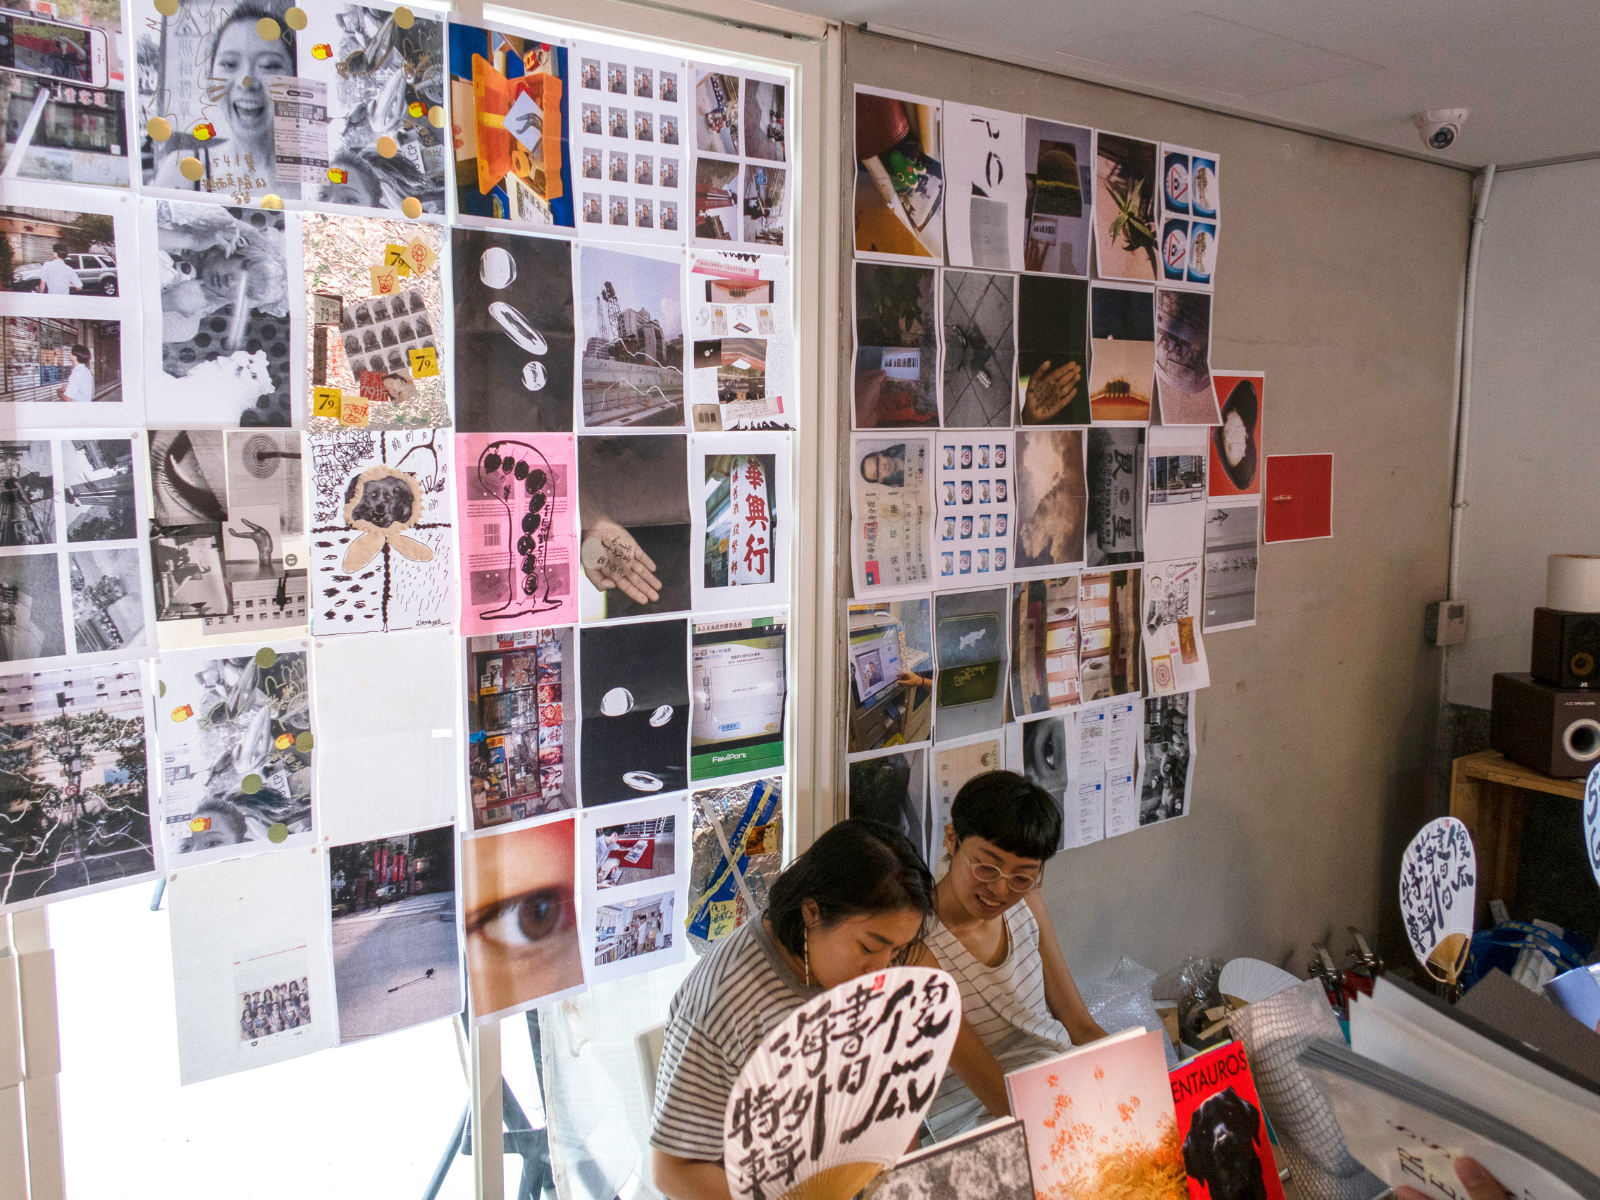 Happen Taiwan Students act as self-publishers, stimulating creativity and producing authentic paper works under the guidance of the lecturers